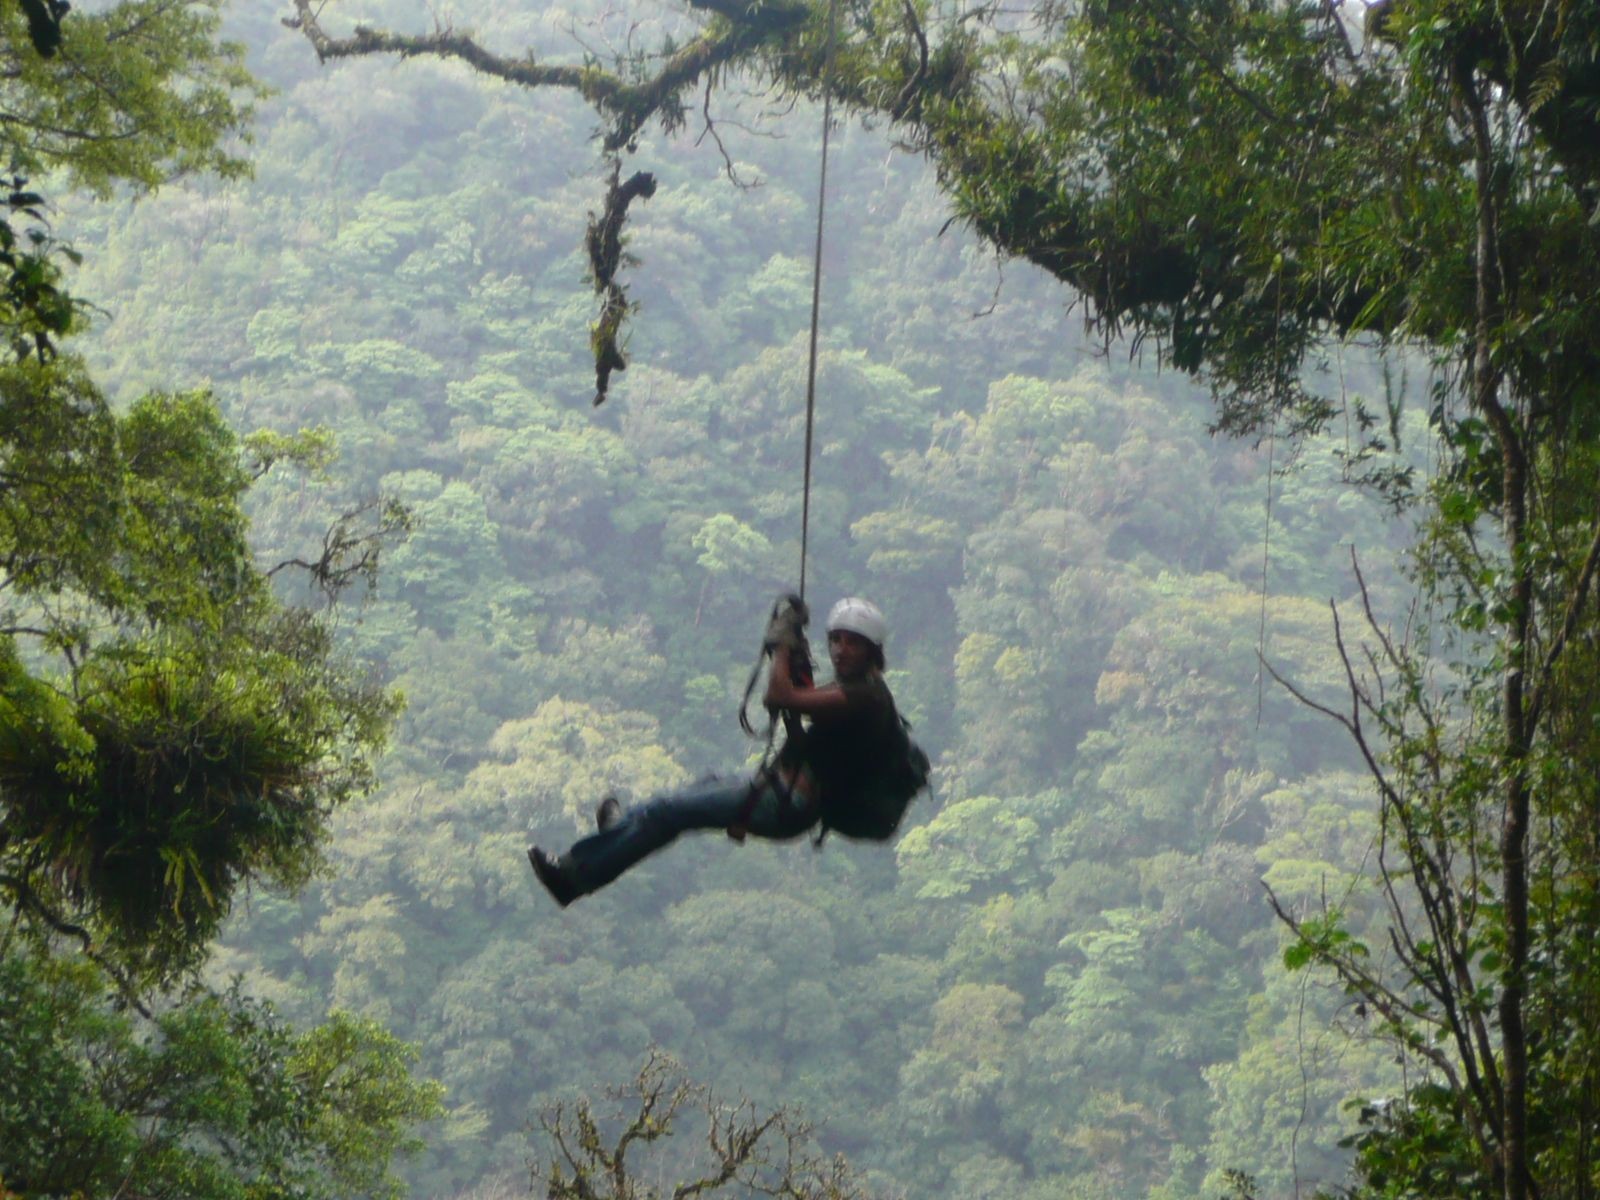 Extremo Canopy Tour